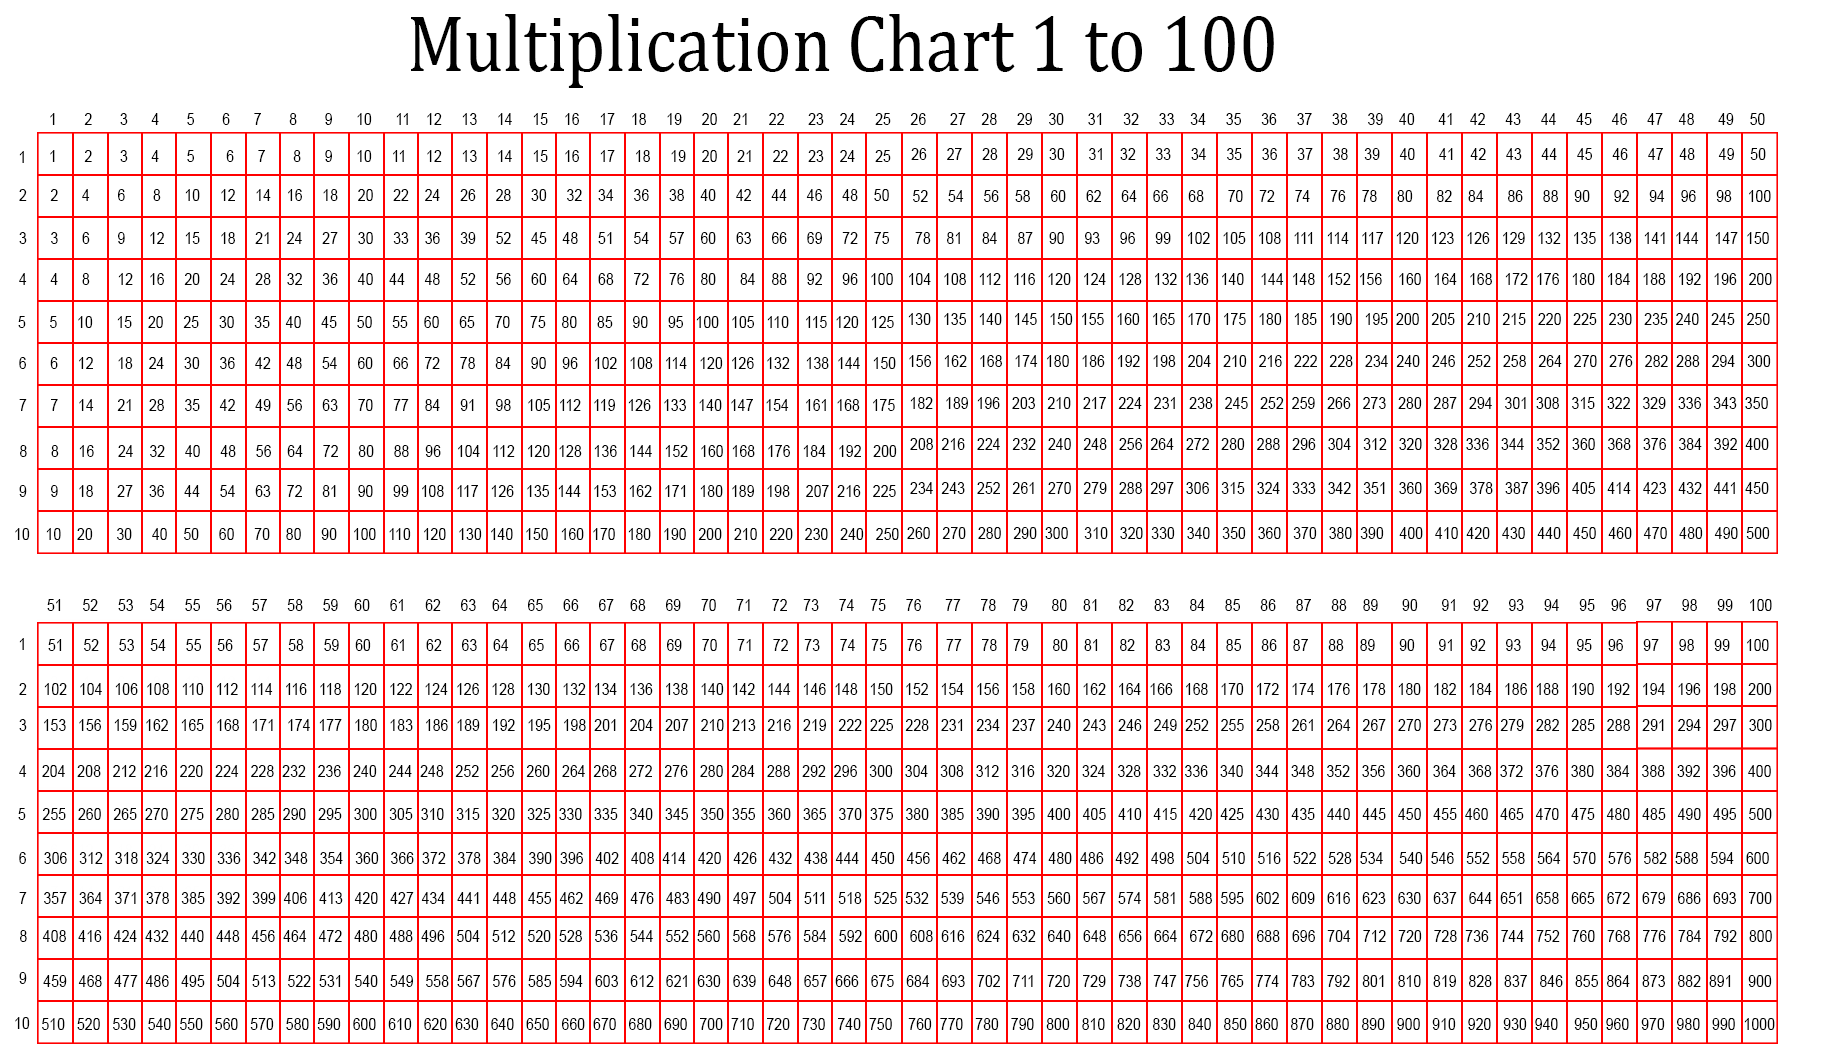 2 times table up to 100